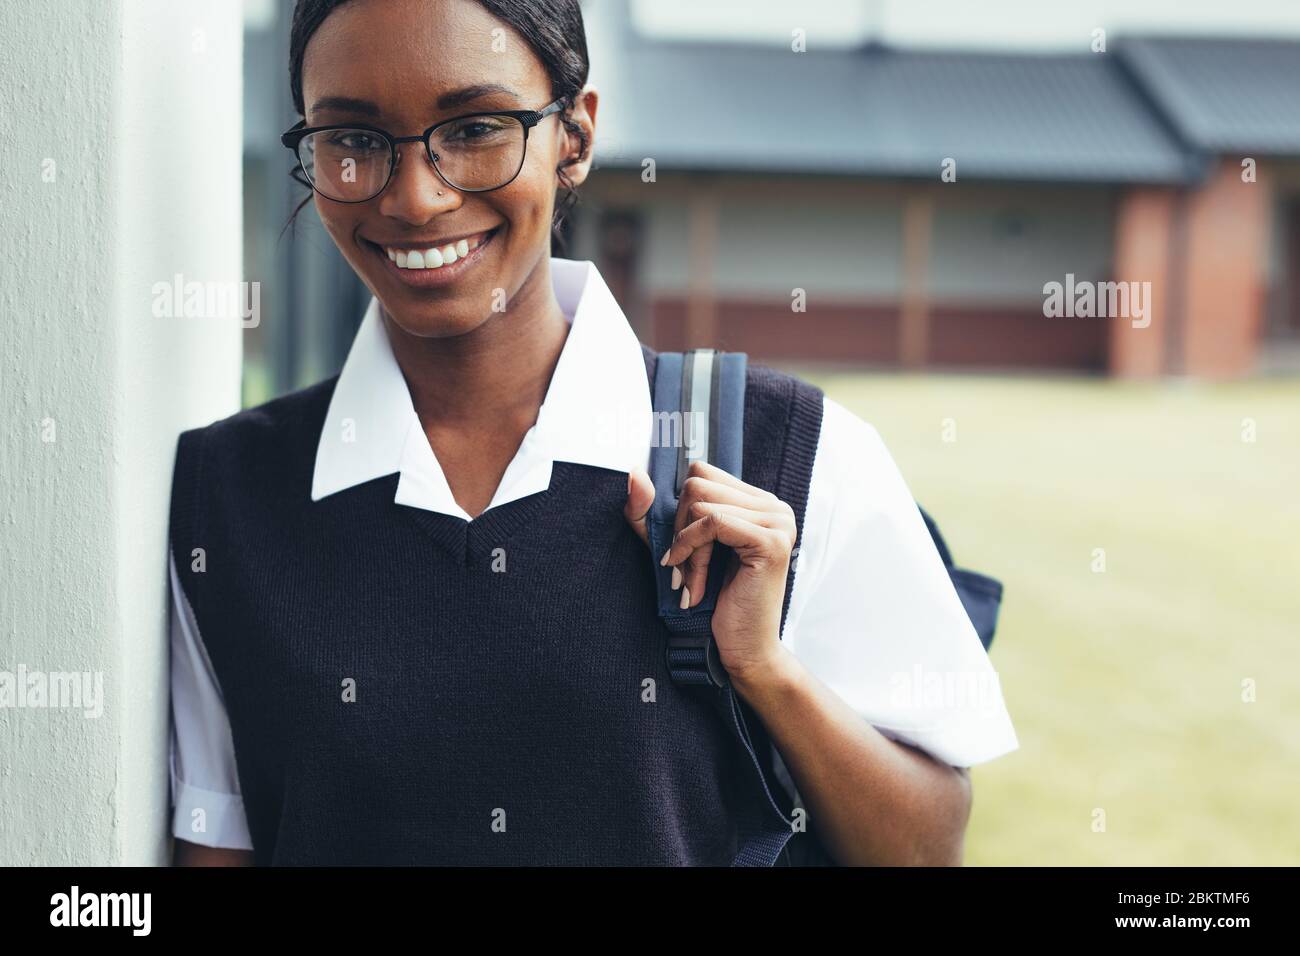 Teenage girl with schoolbag walking through the high school corridor. Female high school student in uniform looking at camera and smiling. Stock Photo